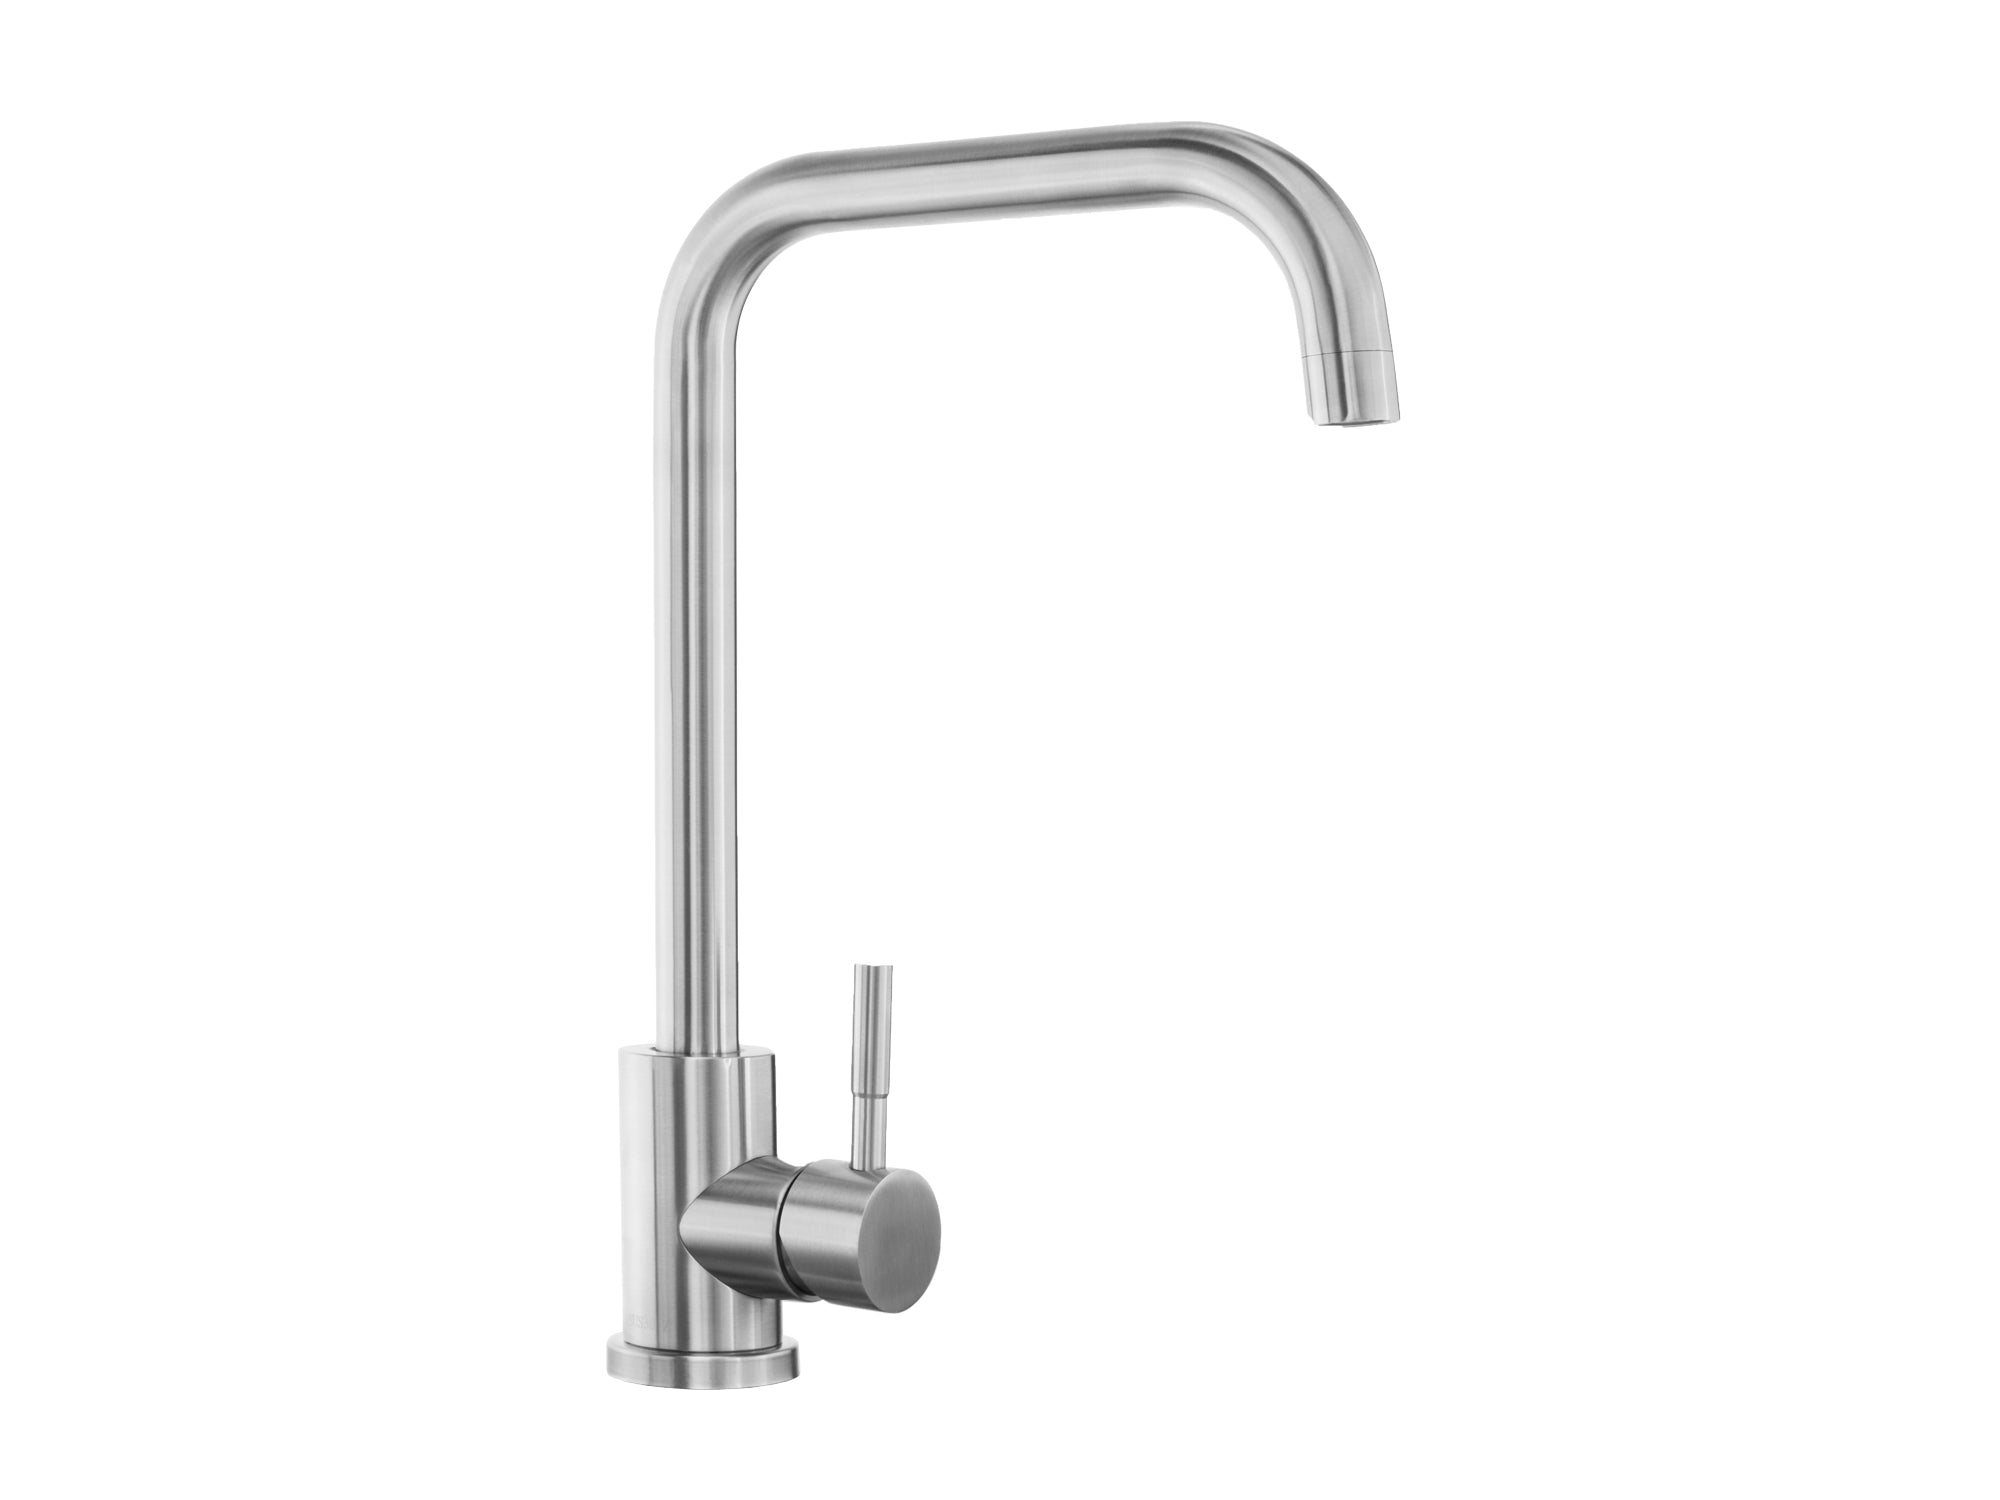 Pro Series Garage Sink Faucet with Hoses